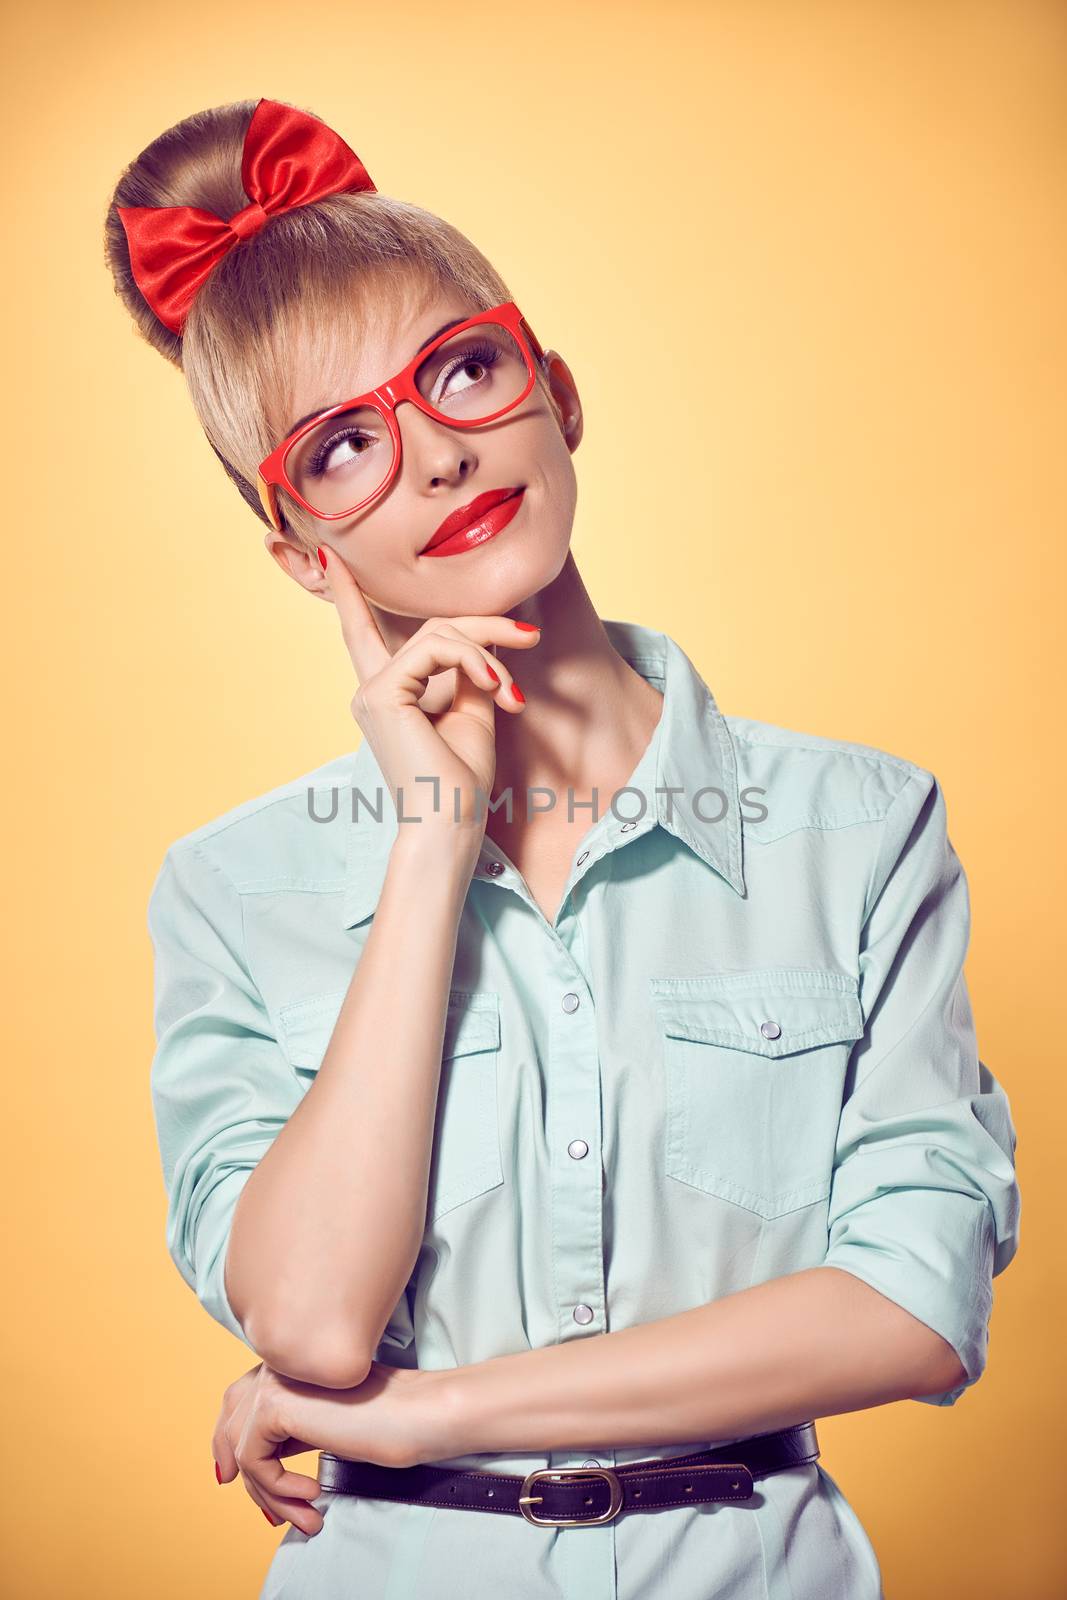 Beauty fashion portrait business woman in stylish red glasses thinking, idea. Attractive pretty blonde girl smiling. Confidence, Pinup hairstyle bow makeup.Unusual playful, emotions.Vintage, on yellow